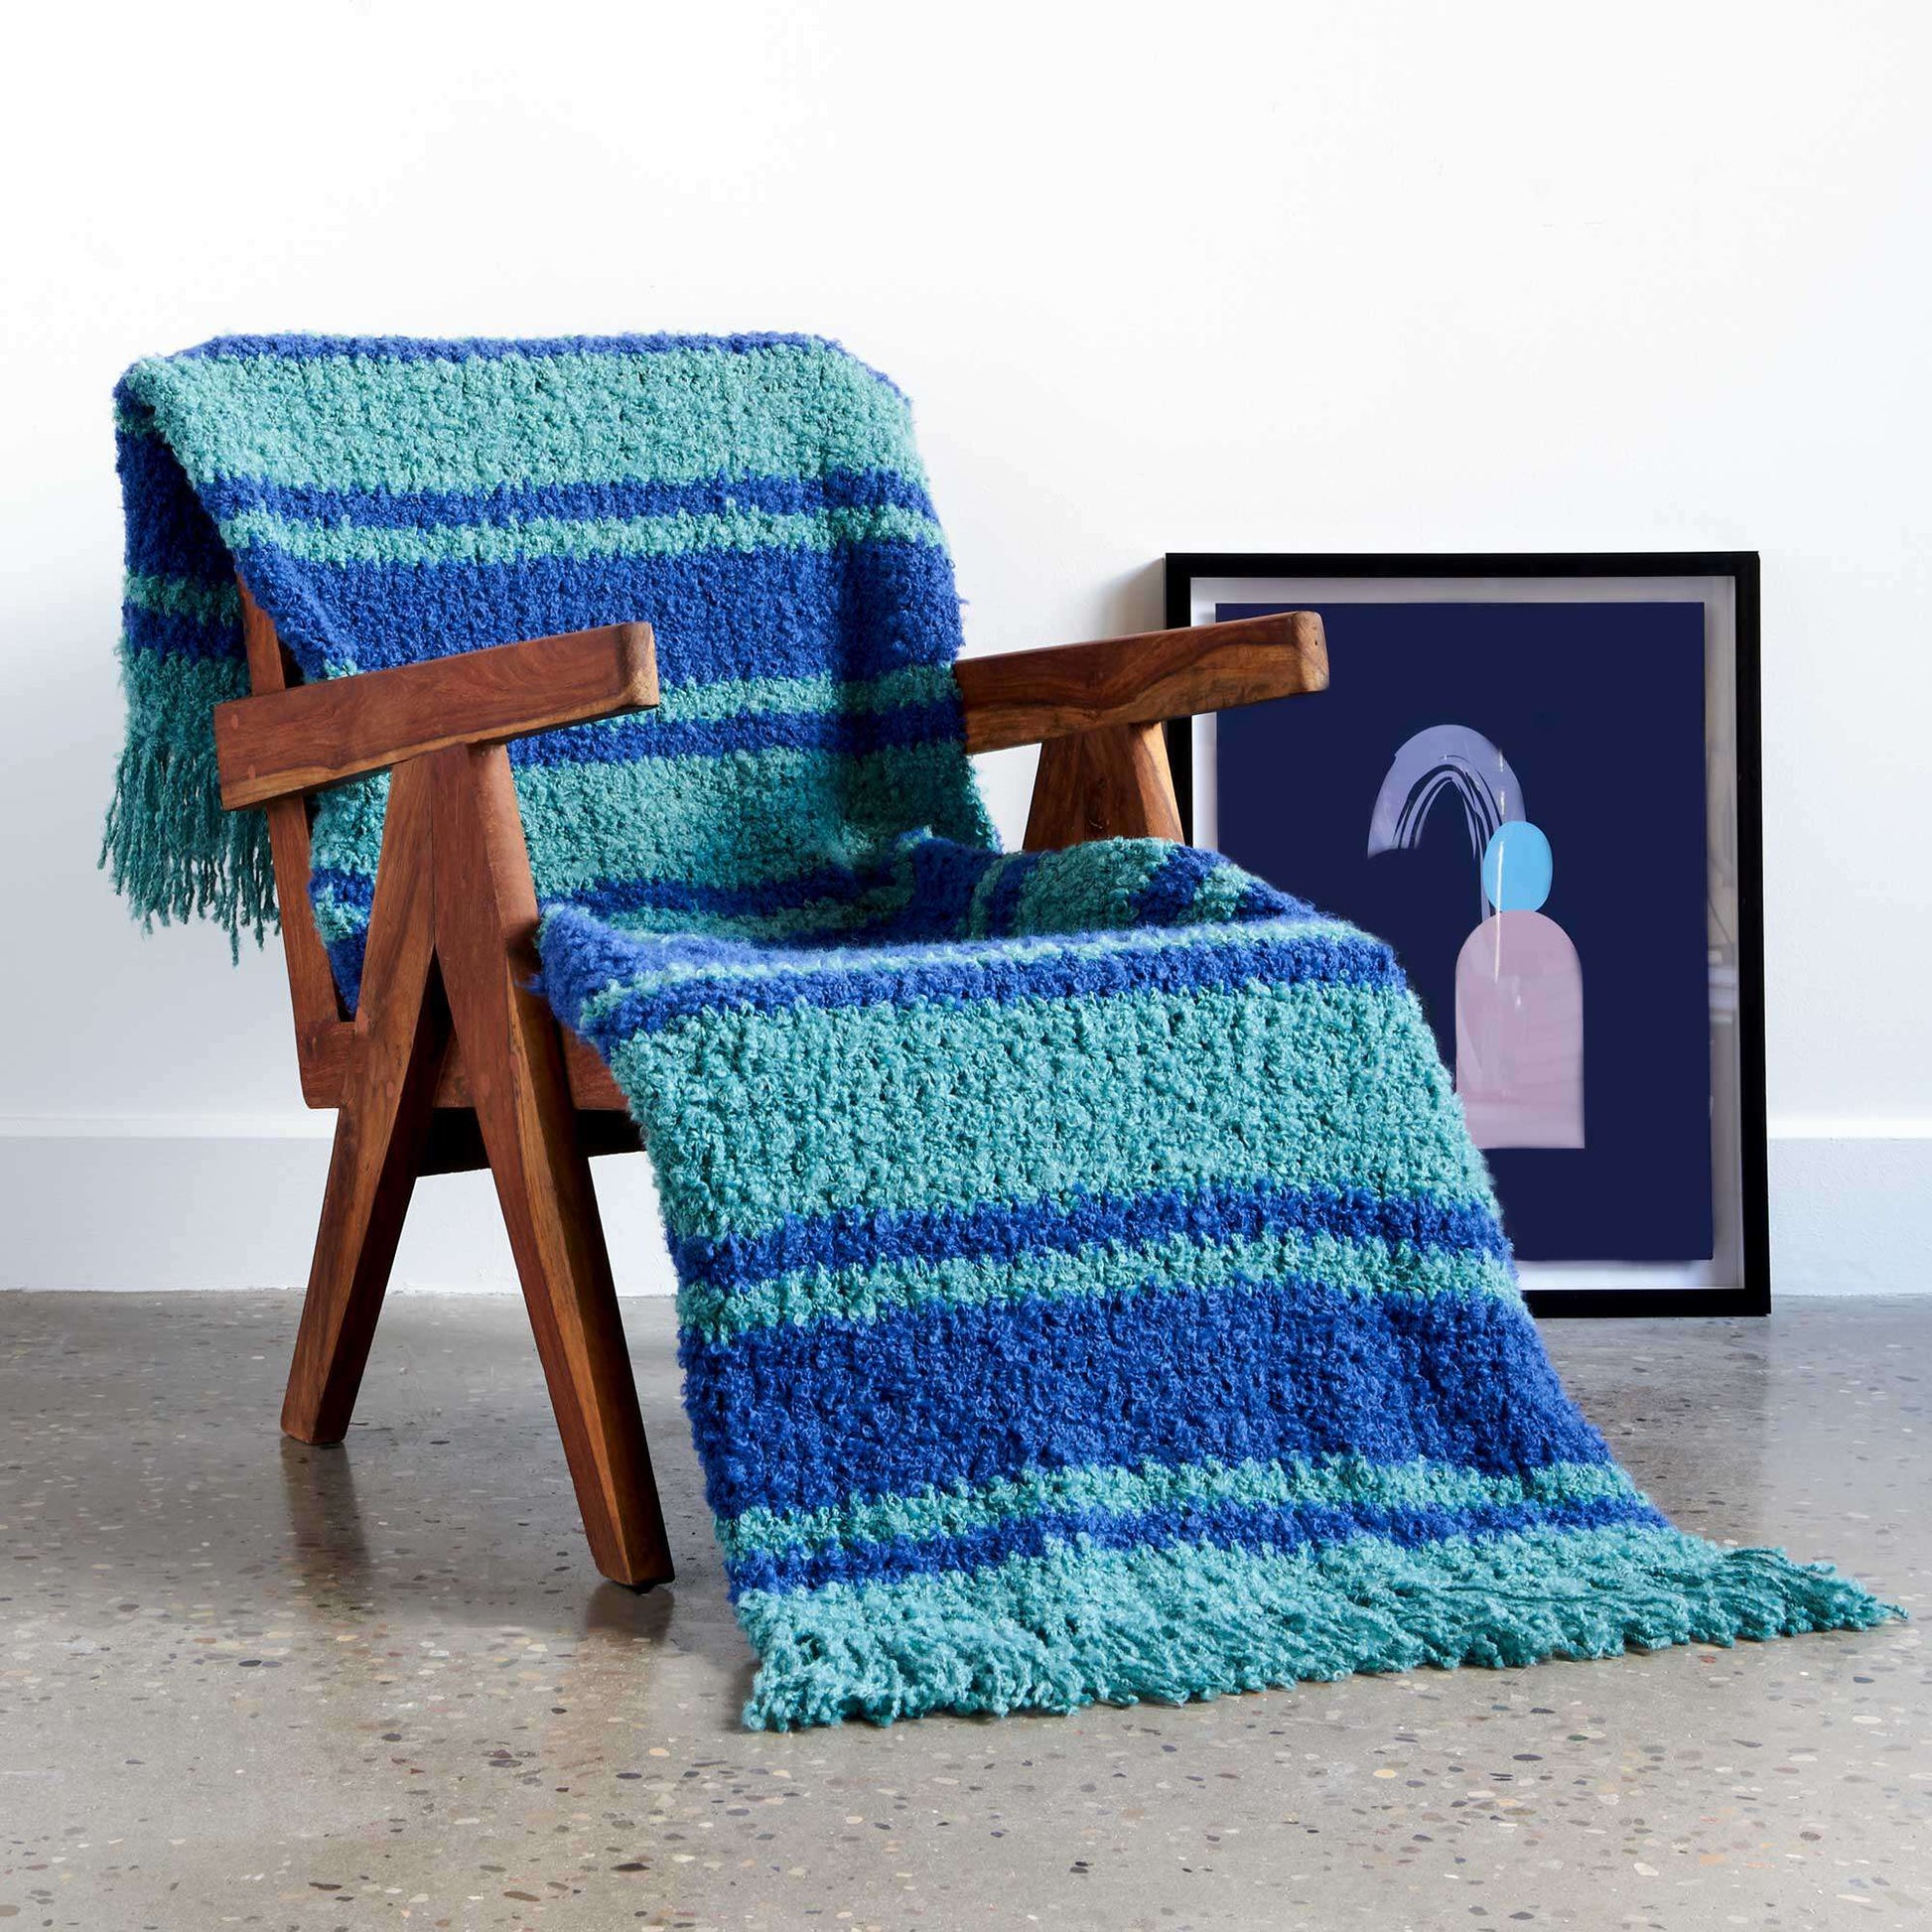 YTAP C202 Scrumptious Stripes Blanket - Around the Table Yarns